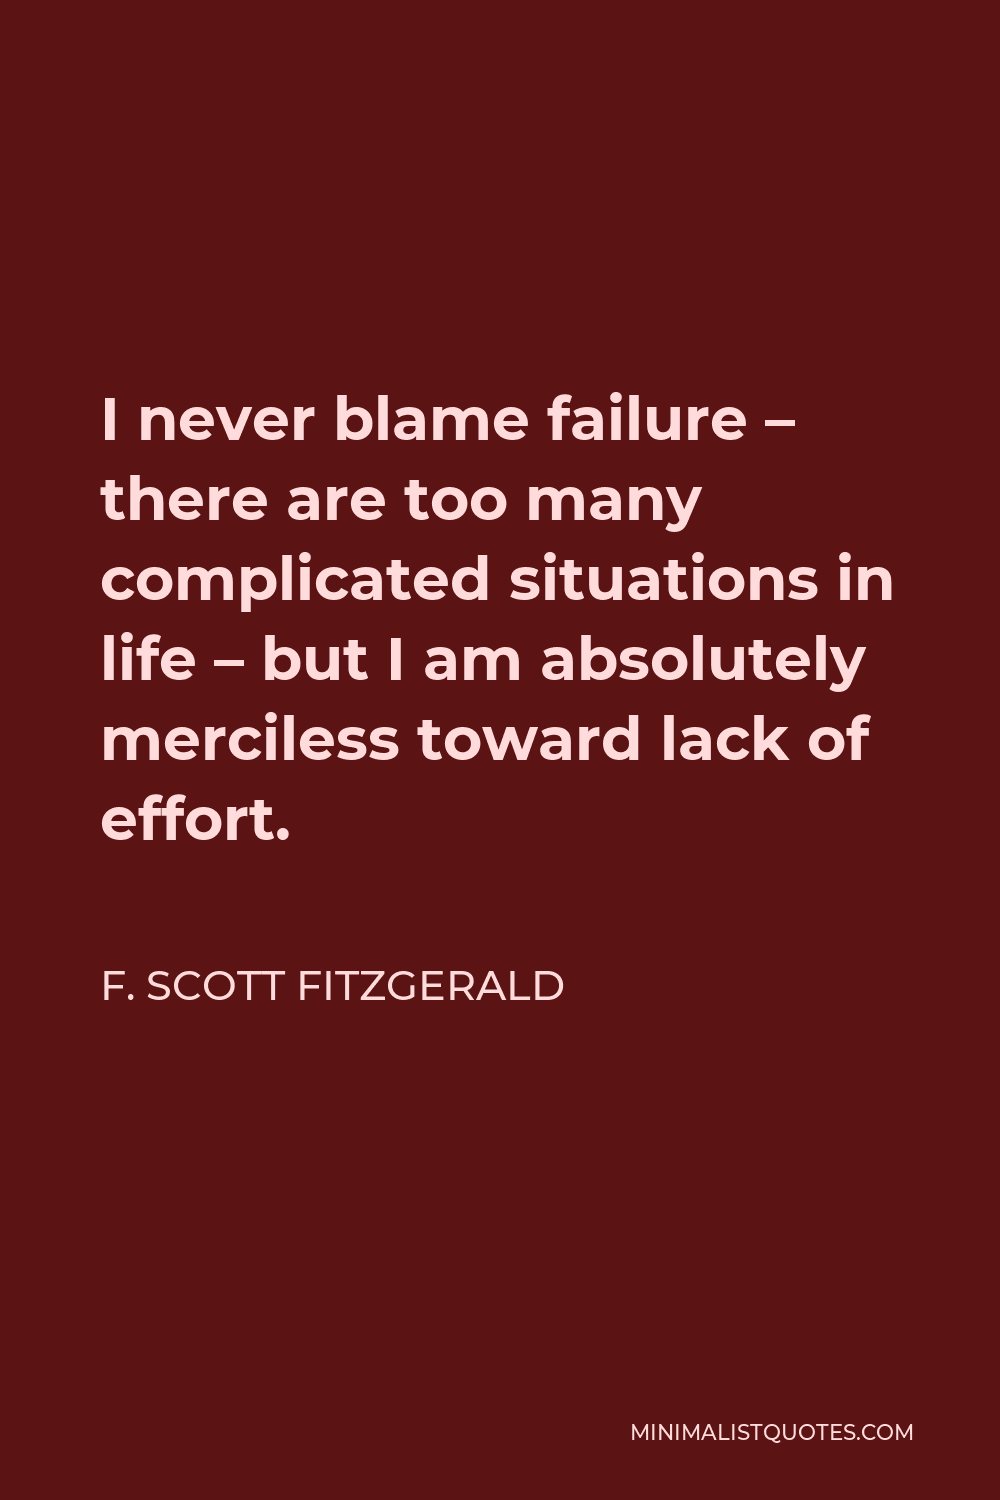 F. Scott Fitzgerald Quote - I never blame failure – there are too many complicated situations in life – but I am absolutely merciless toward lack of effort.